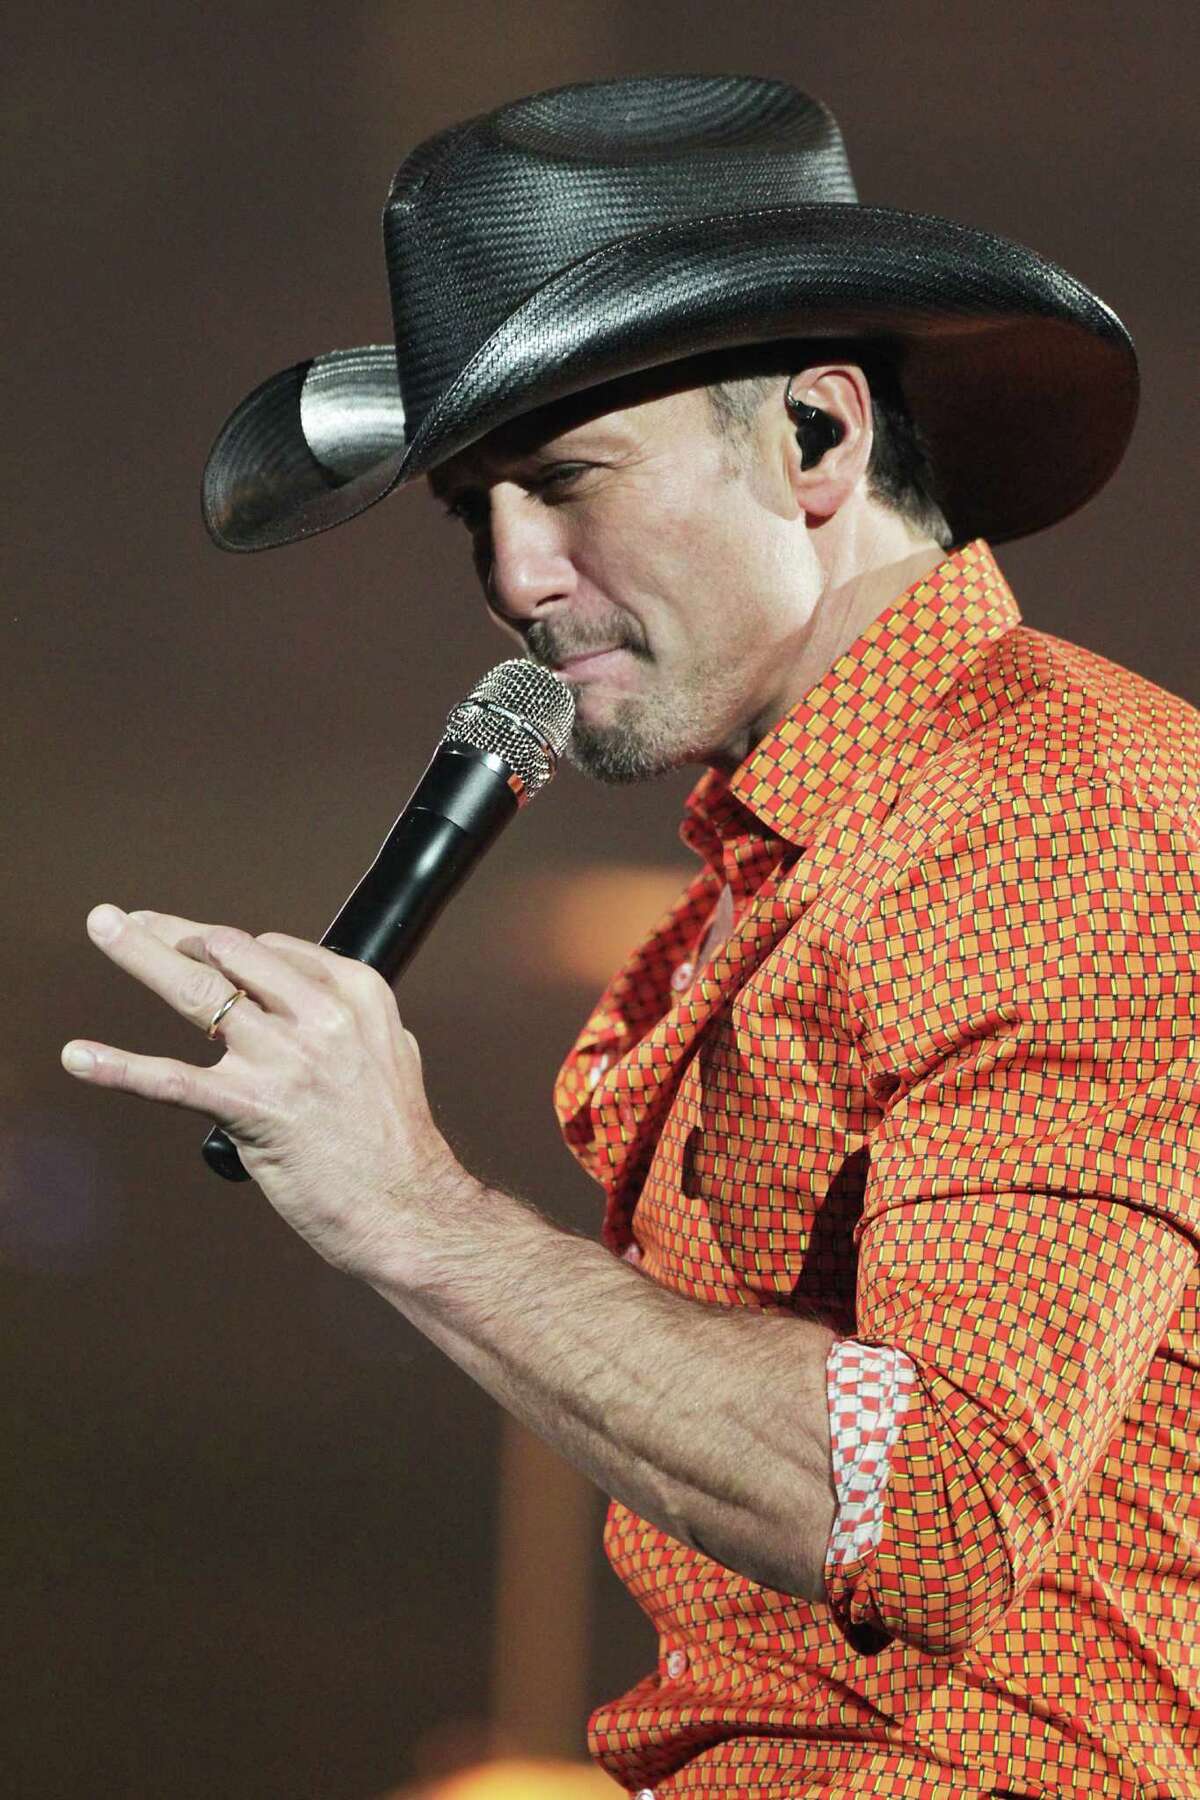 Tim McGraw performs in concert at RodeoHouston in Reliant Stadium Friday, March 8, 2013, in Houston. ( James Nielsen / Houston Chronicle )